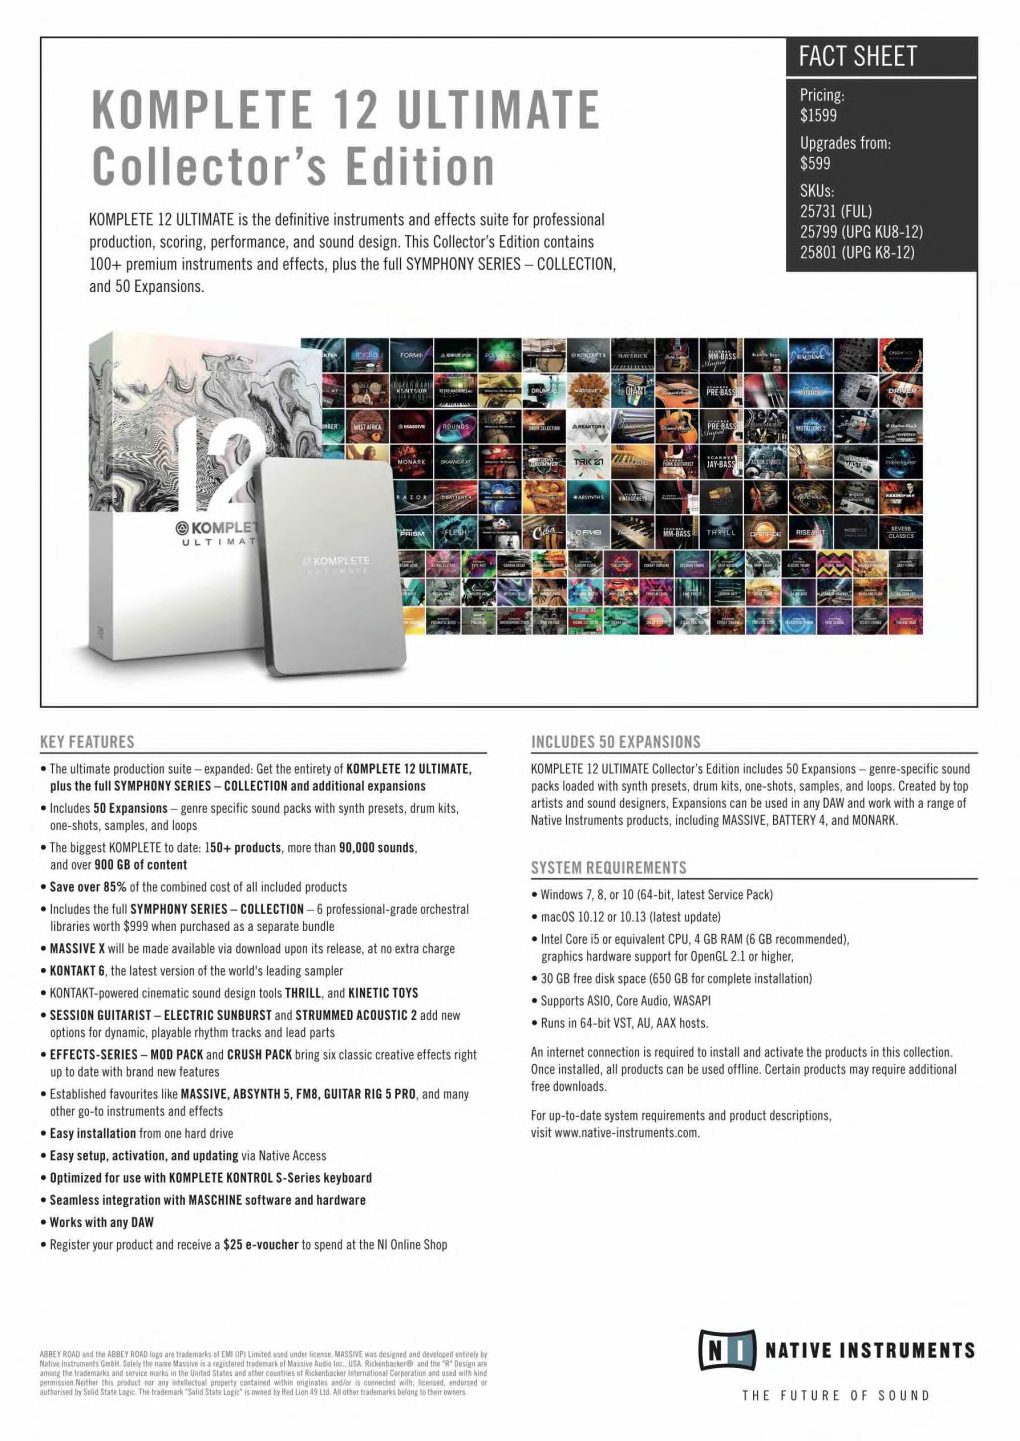 KOMPLETE 12 ULTIMATE Collector's Edition